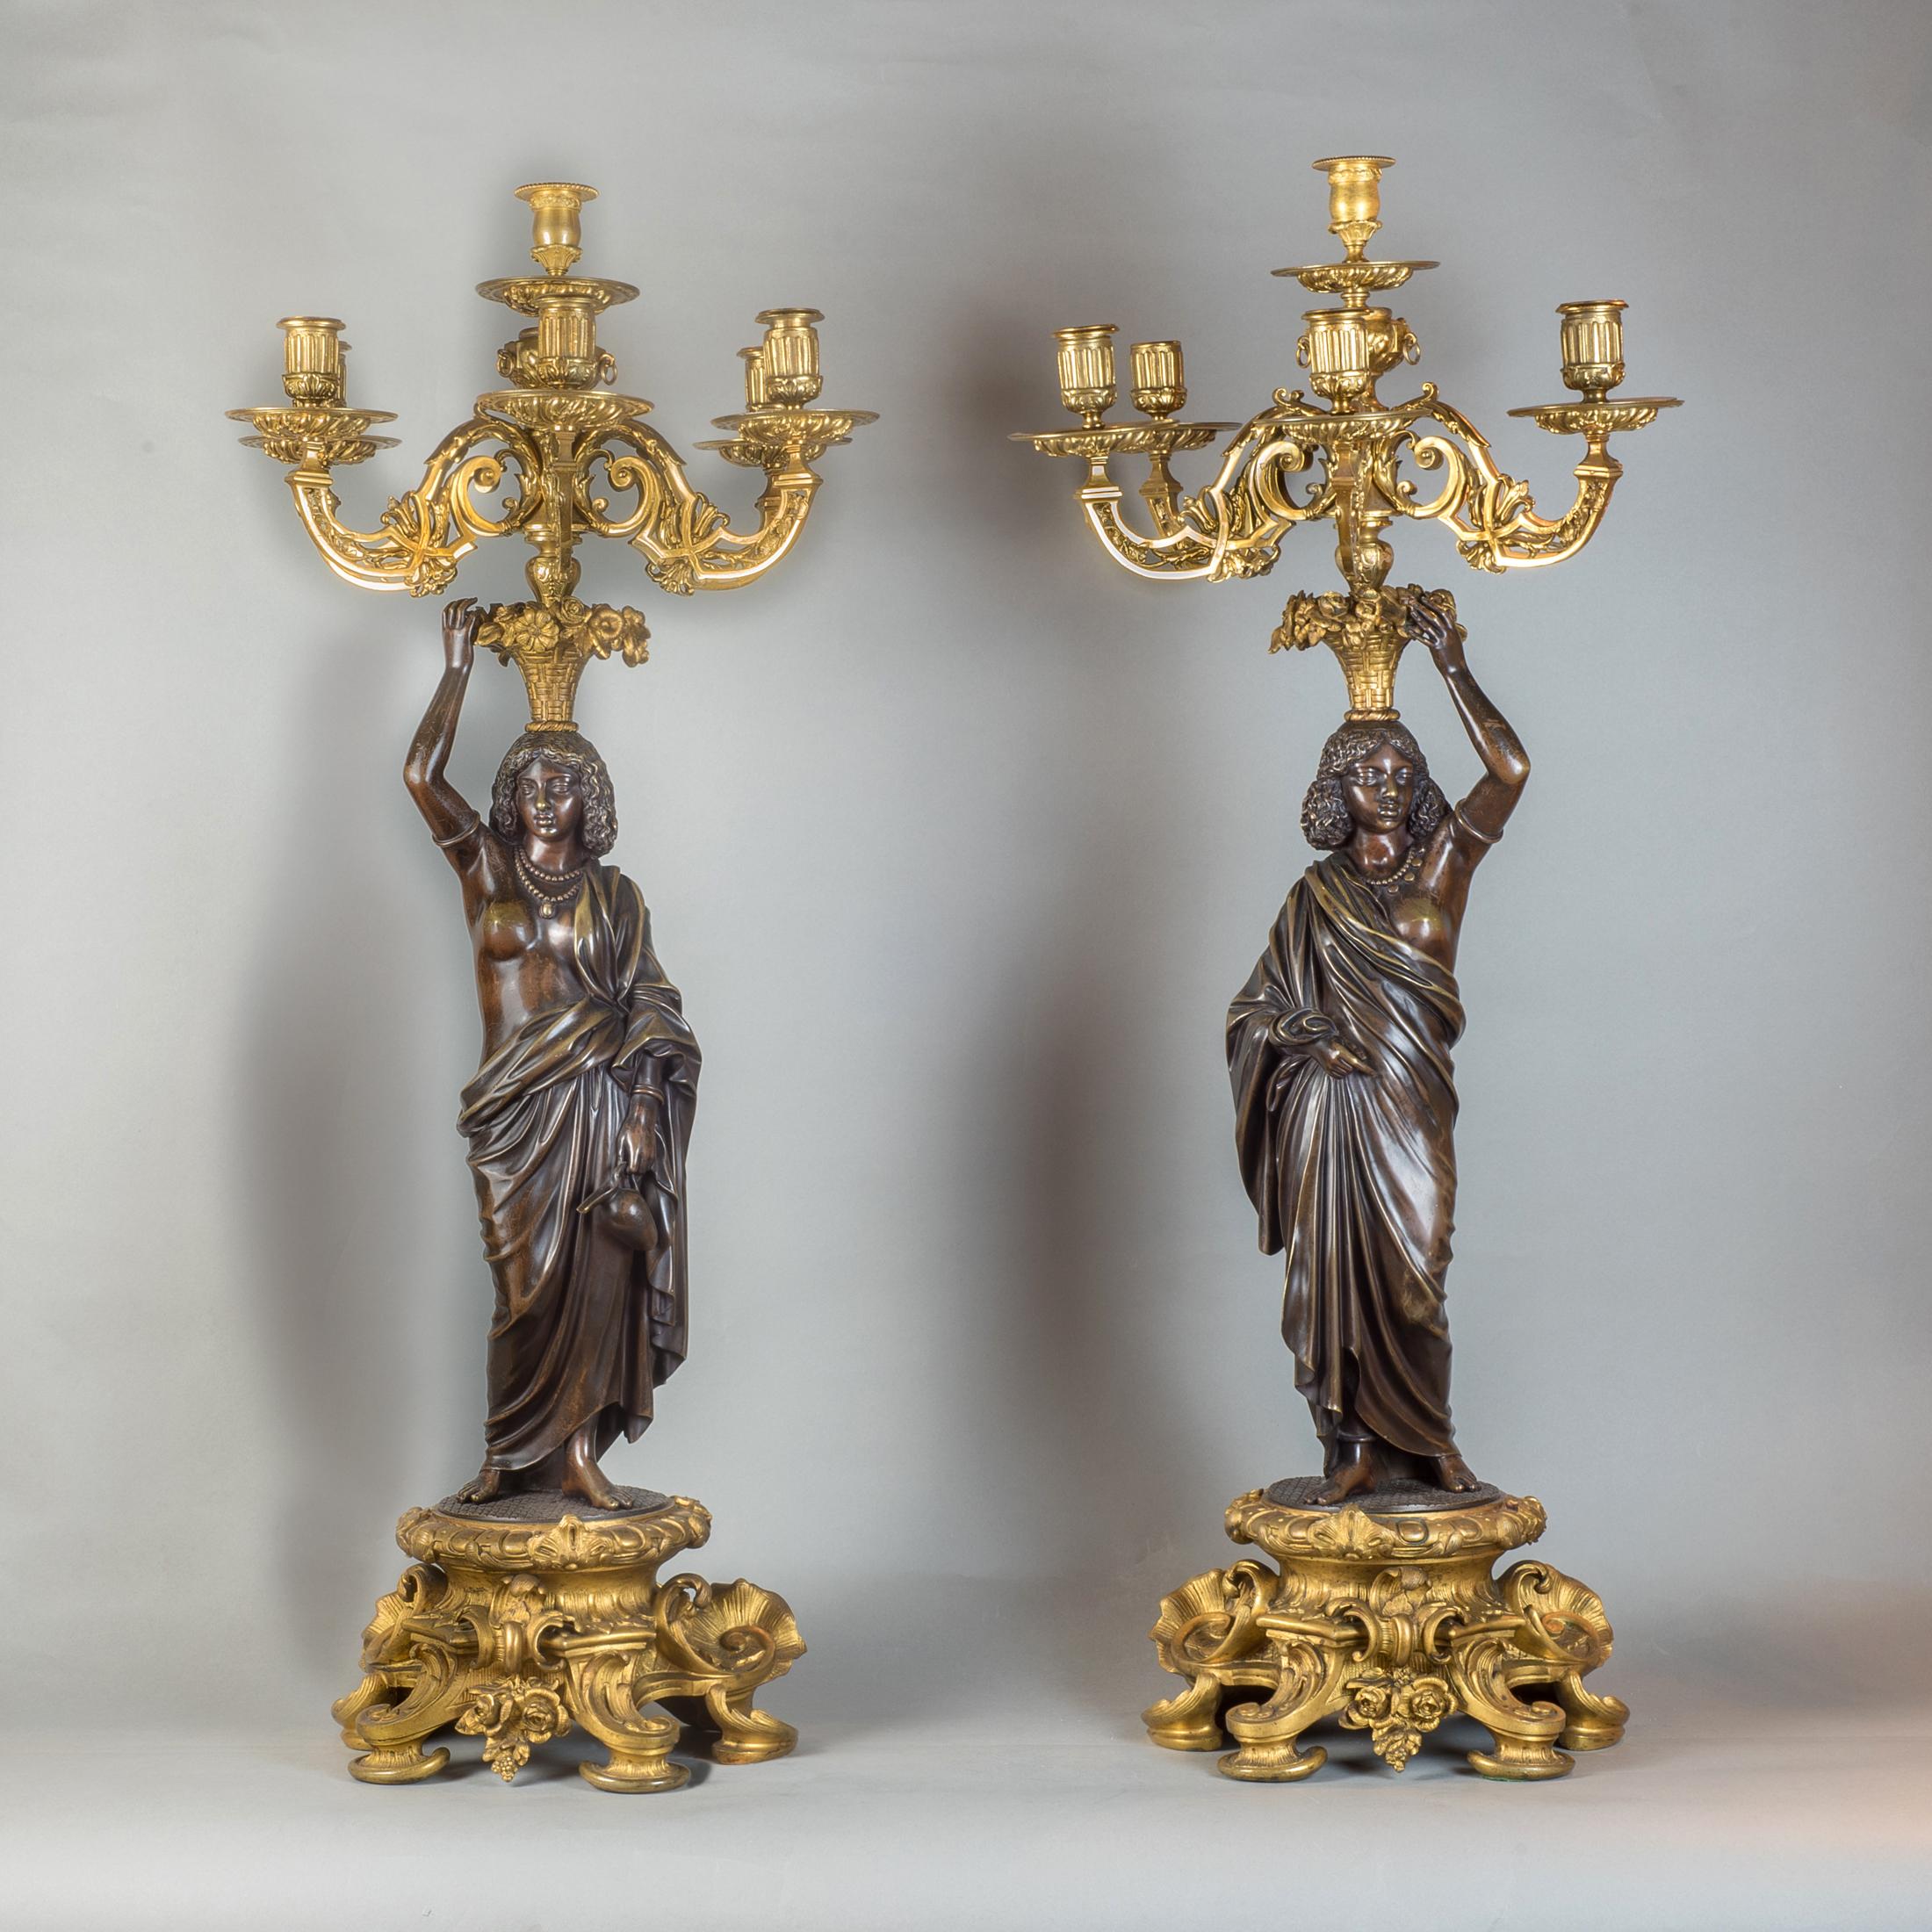 One holding a pitcher, both with six-light candelabras surmounted on floral baskets perched upon their heads, draped in necklaces.

Origin: French
Date: circa 1880
Dimension: 36 in. x 14 1/2 in.